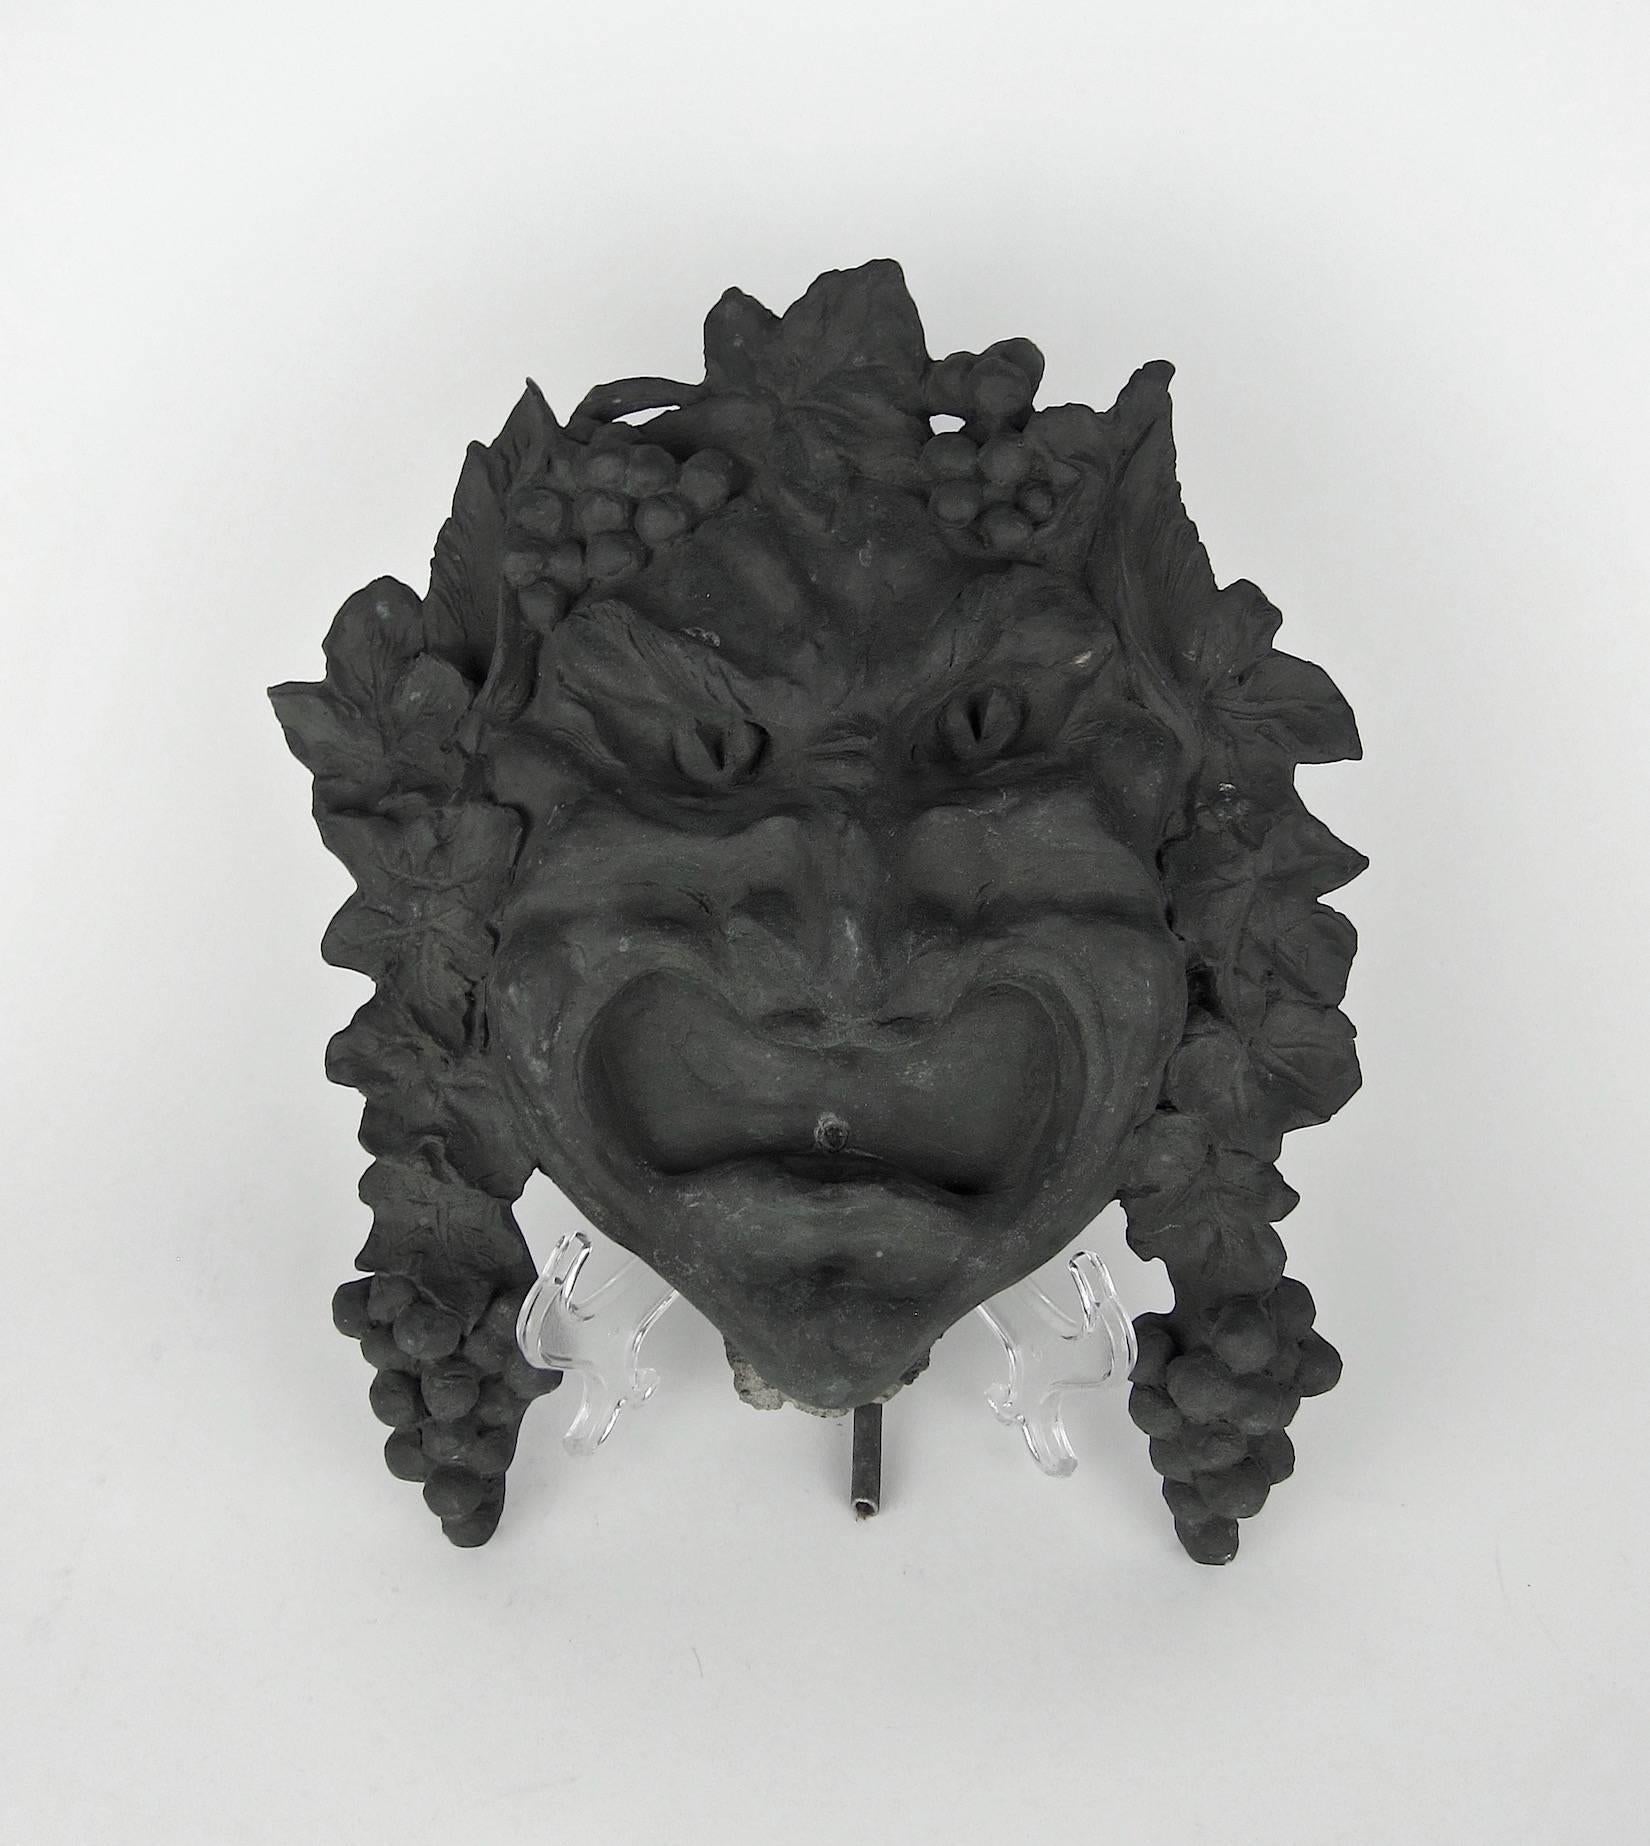 A striking Bacchanalian fountain head / wall sculpture in heavy bronze designed in Classical Roman style by noted American metalsmith and jeweler Marie Zimmermann (1879-1972) and cast by Roman Bronze works of Greenpoint, Brooklyn, circa 1915. The